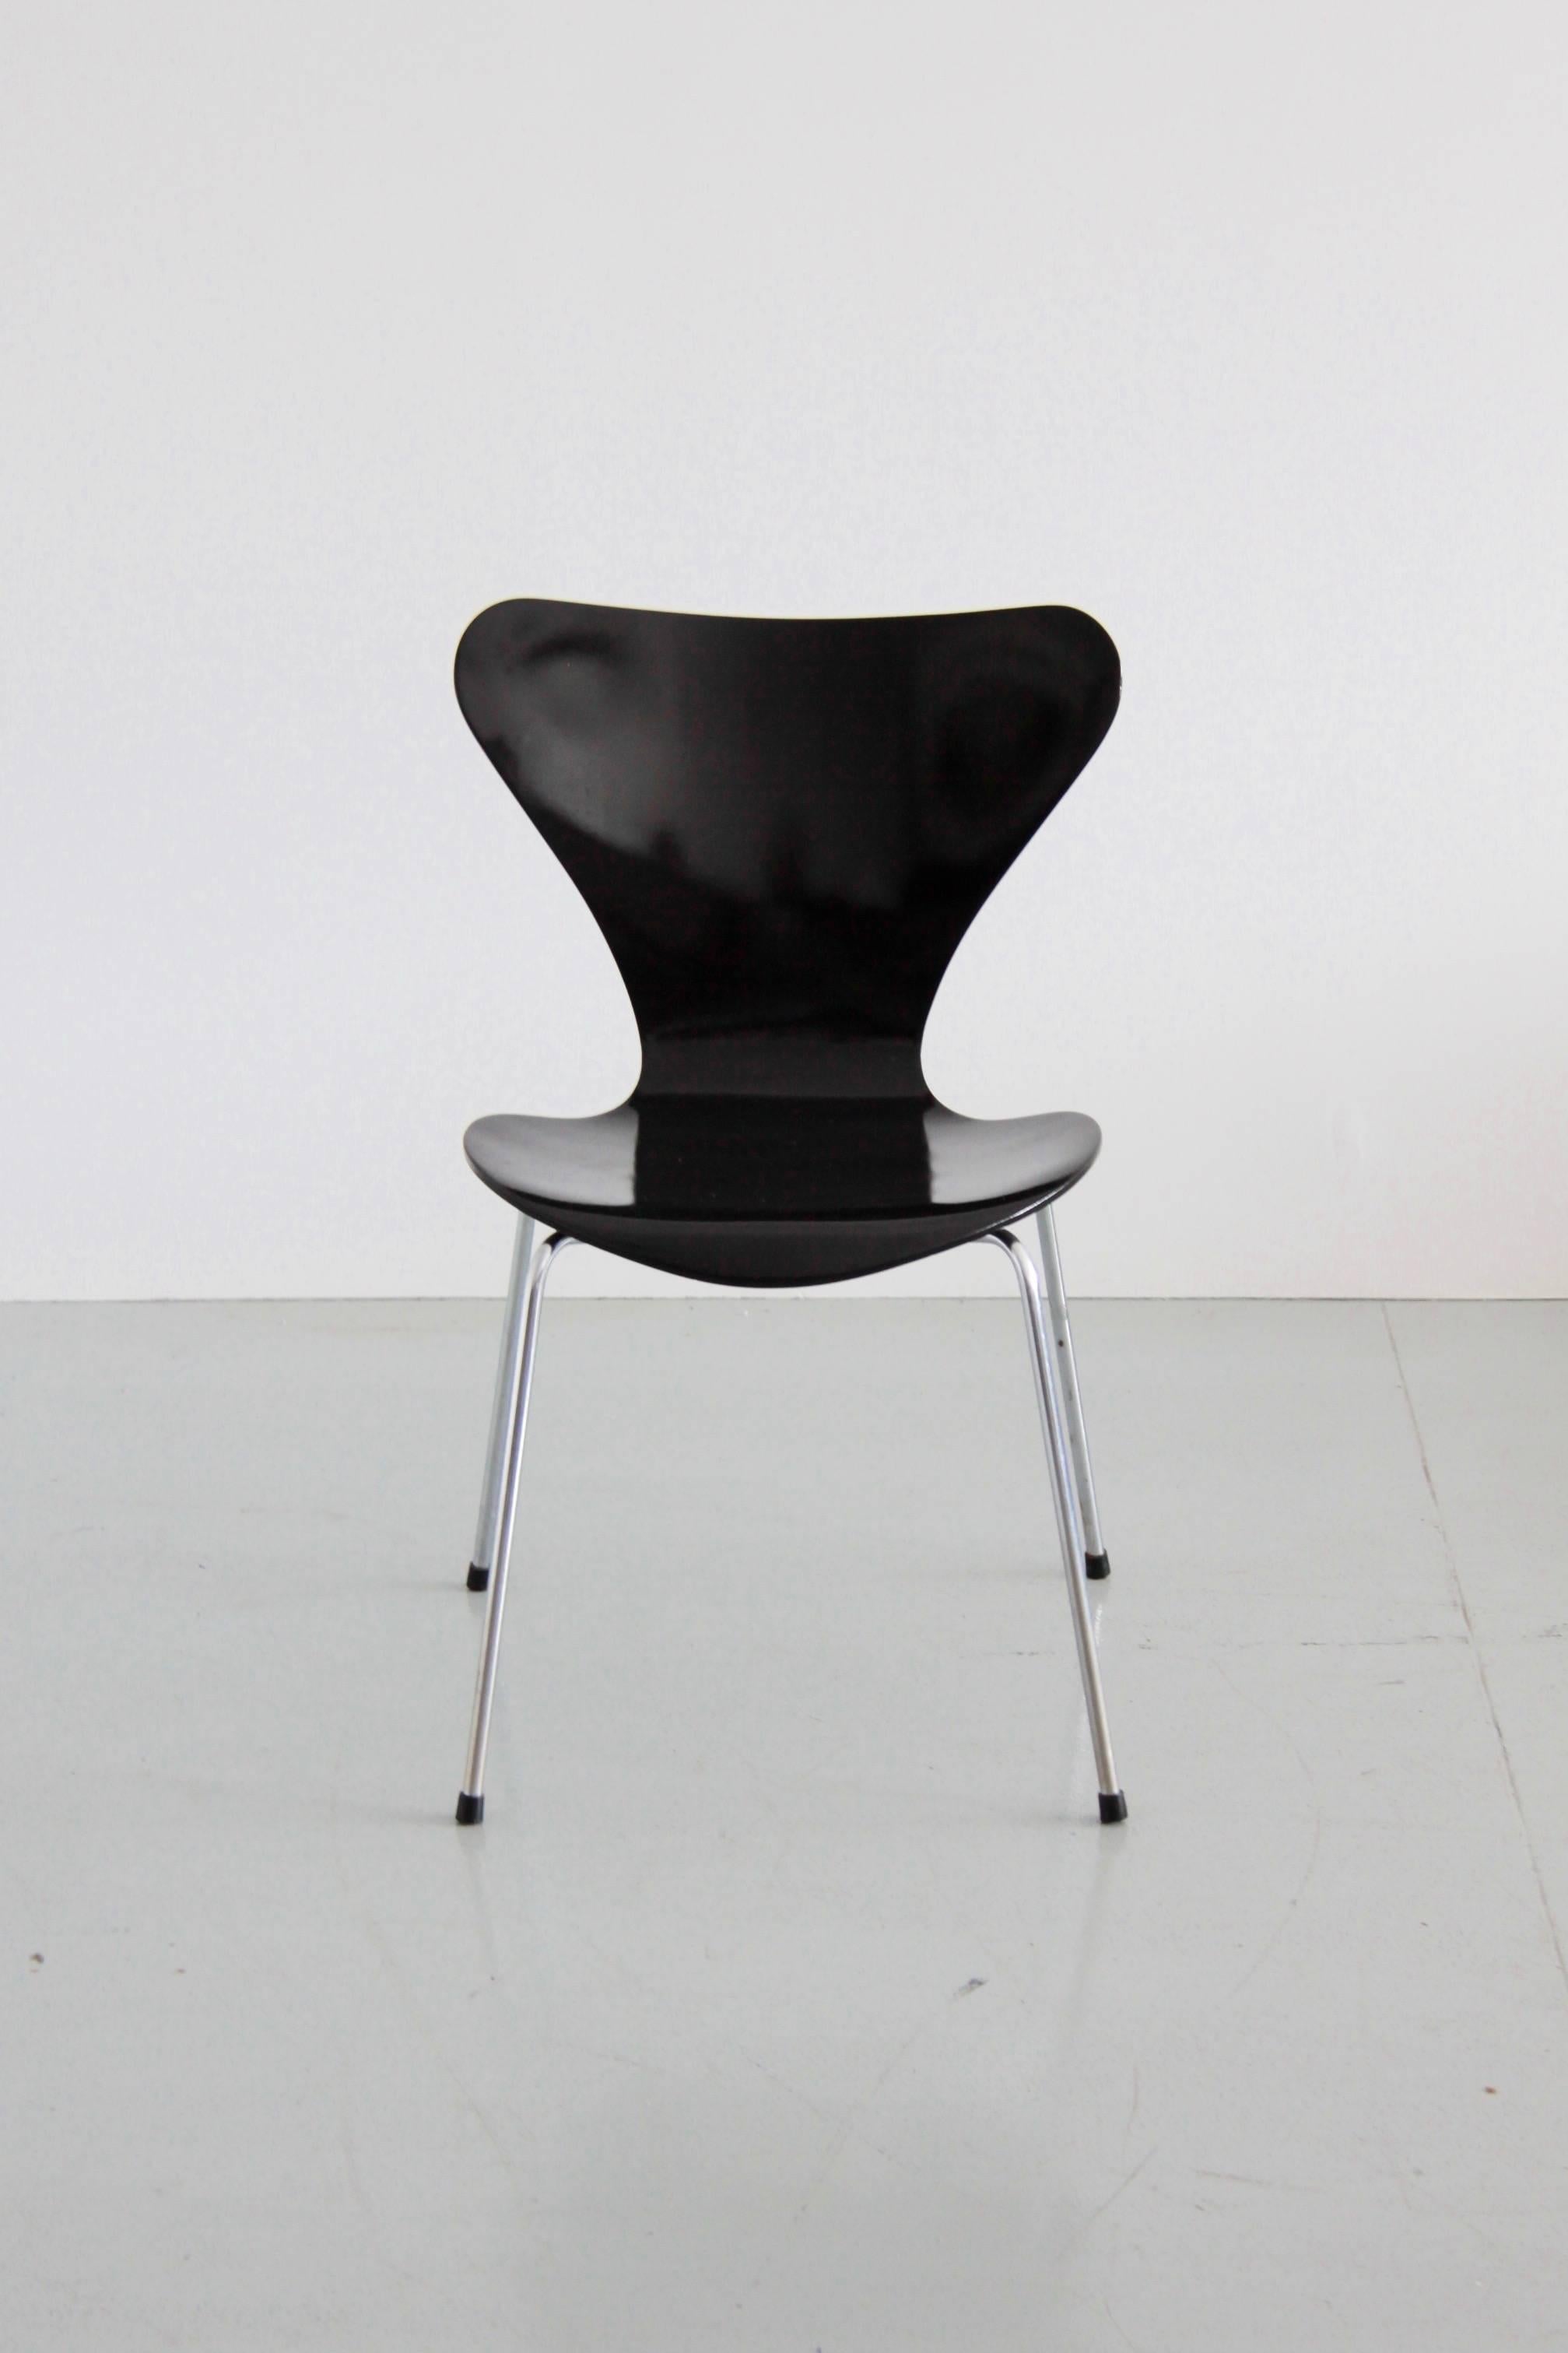 This “Butterfly” chair was designed by Arne Jacobsen in 1955 for Fritz Hansen. This one is manufactured in 1968. The chairs are black lacquered bent plywood seat. They feature teak veneered plywood shells and chromed-plated steel frames.